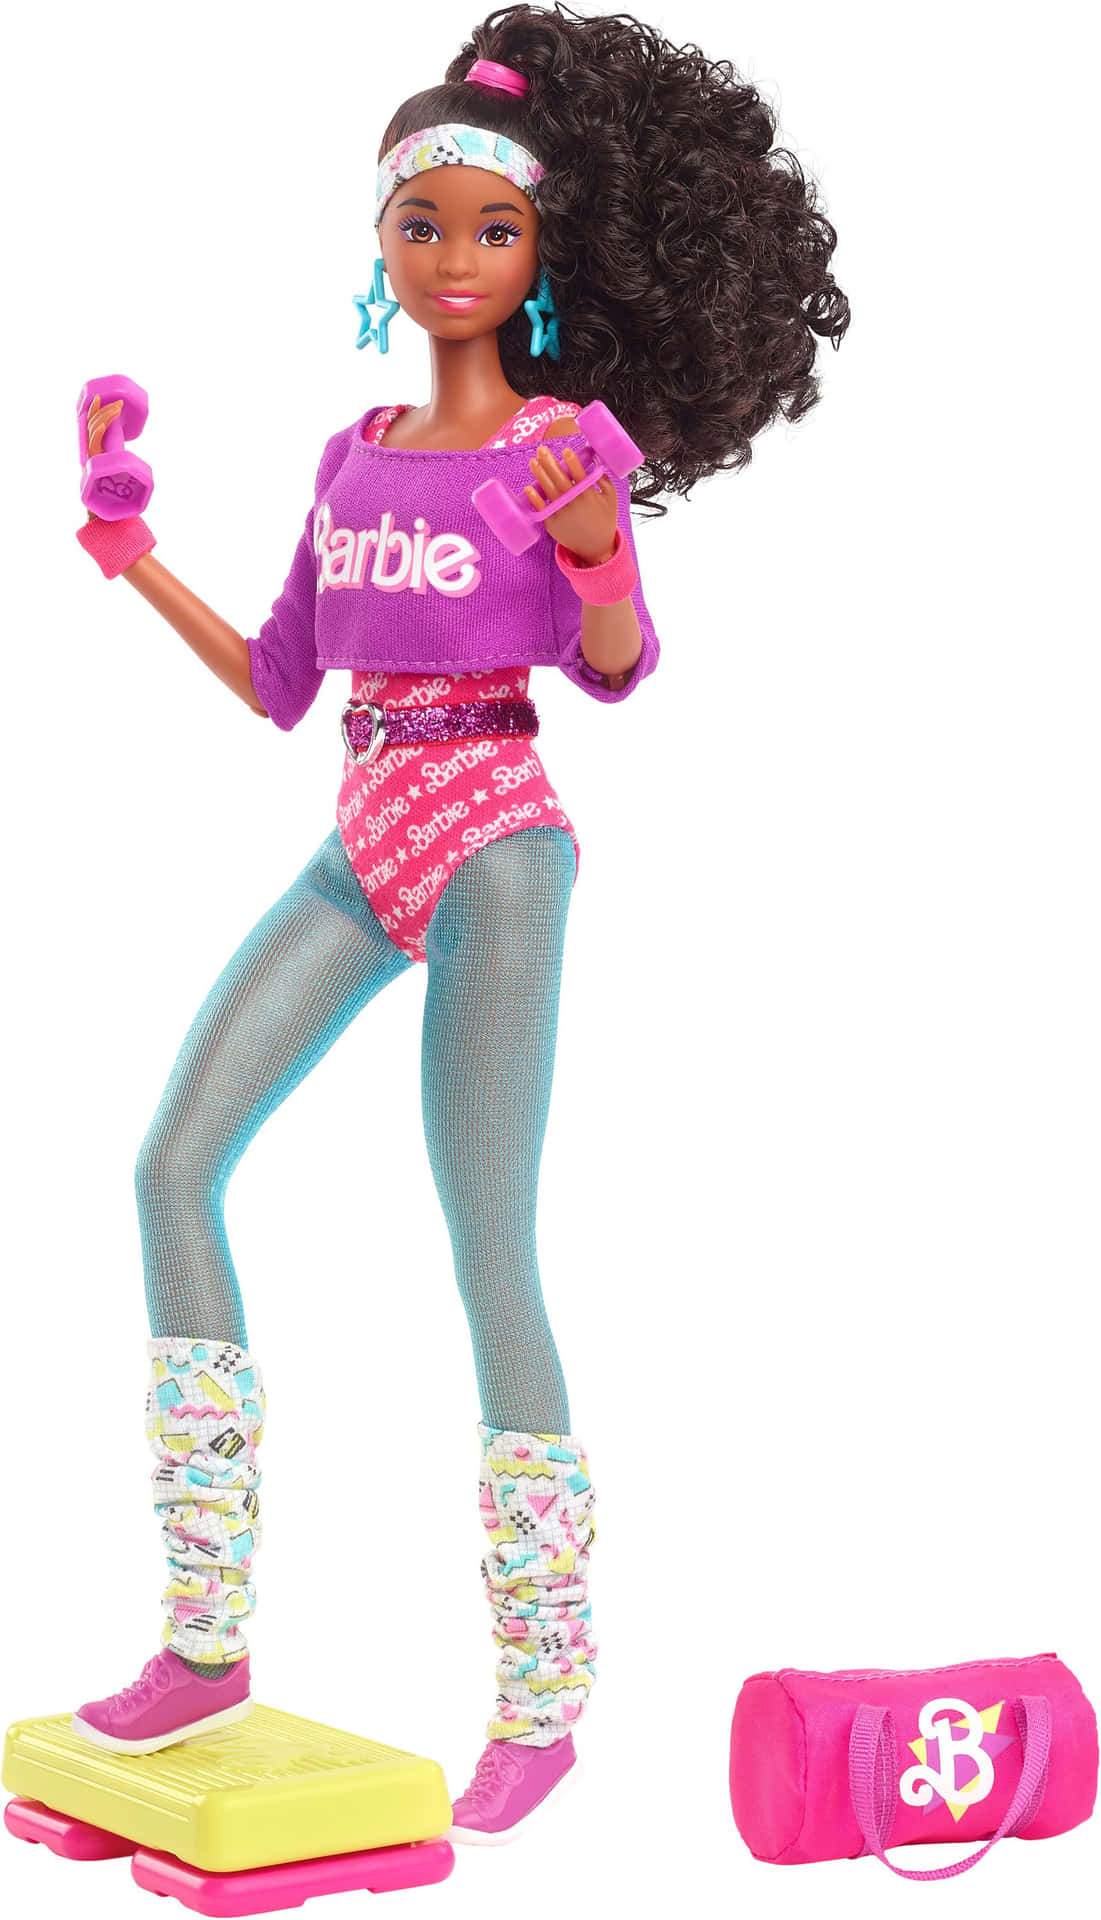 Black Barbie Dollin Pink Outfit Wallpaper